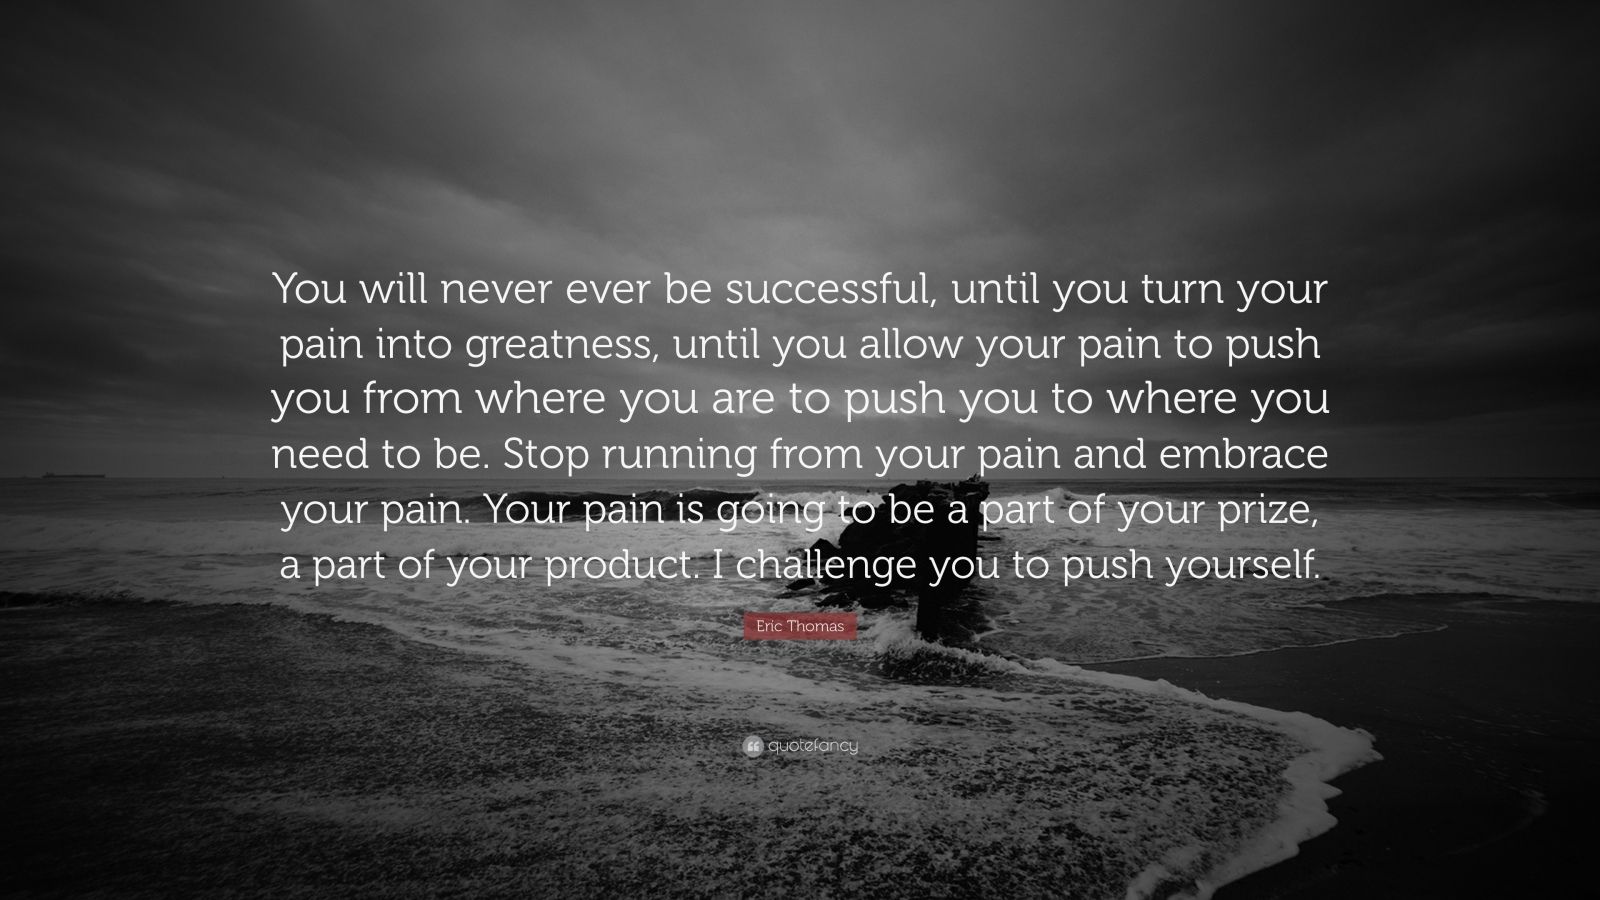 Eric Thomas Quote: “You will never ever be successful, until you turn